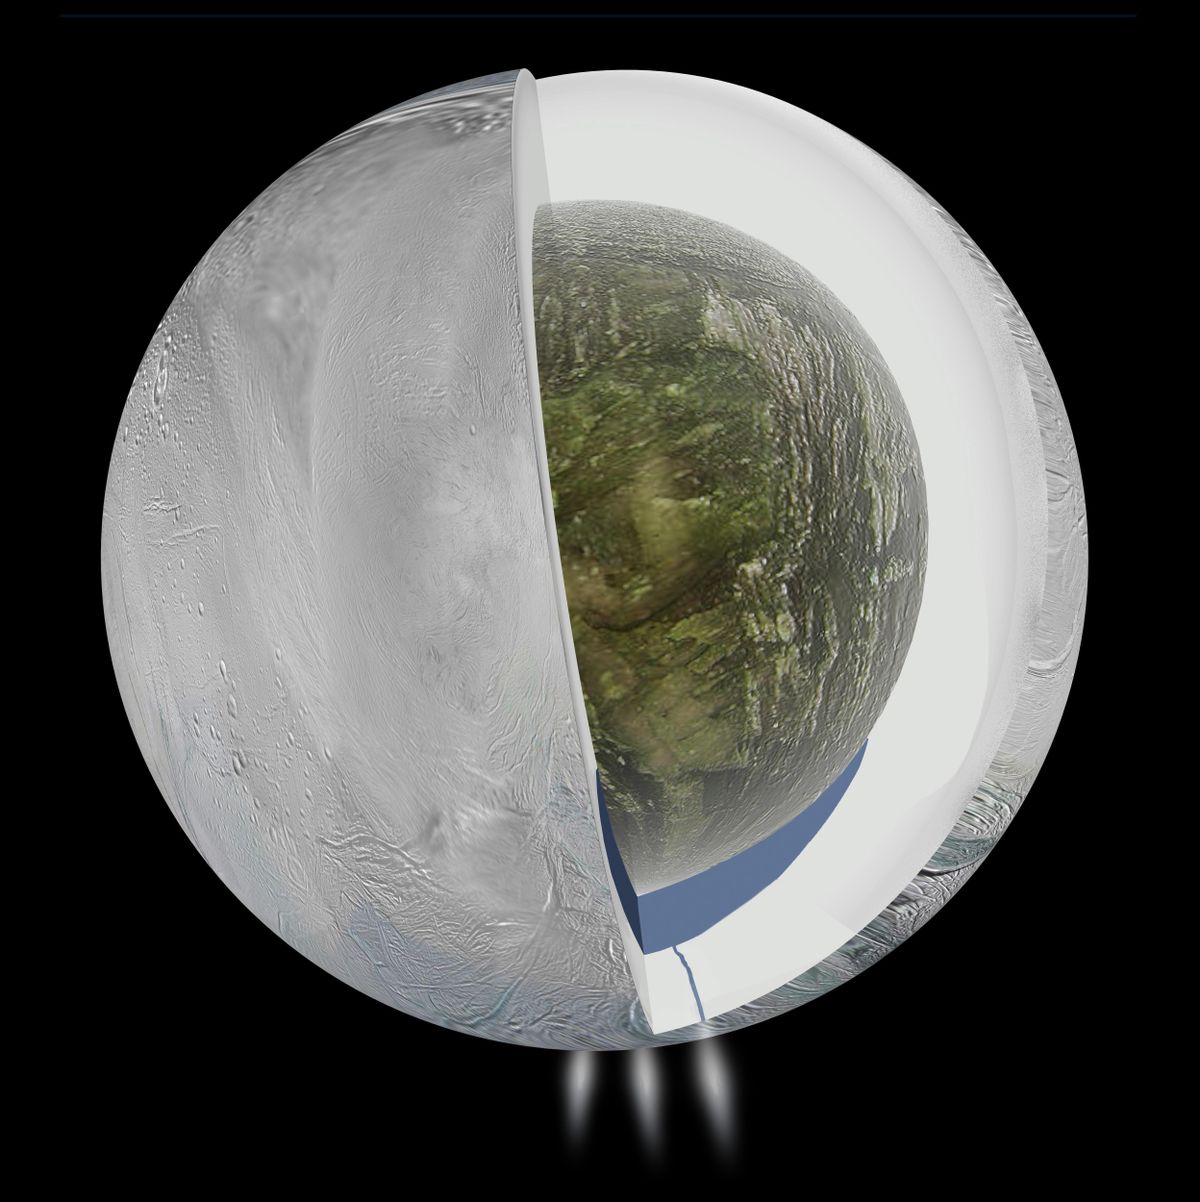  This diagram illustrates the possible interior of Saturn's moon Enceladus based on a gravity investigation by NASA's Cassini spacecraft and NASA's Deep Space Network, reported in April 2014. The gravity measurements suggest an ice outer shell and a low density, rocky core with a regional water ocean sandwiched in between at high southern latitudes.    (NASA/JPL-Caltech)